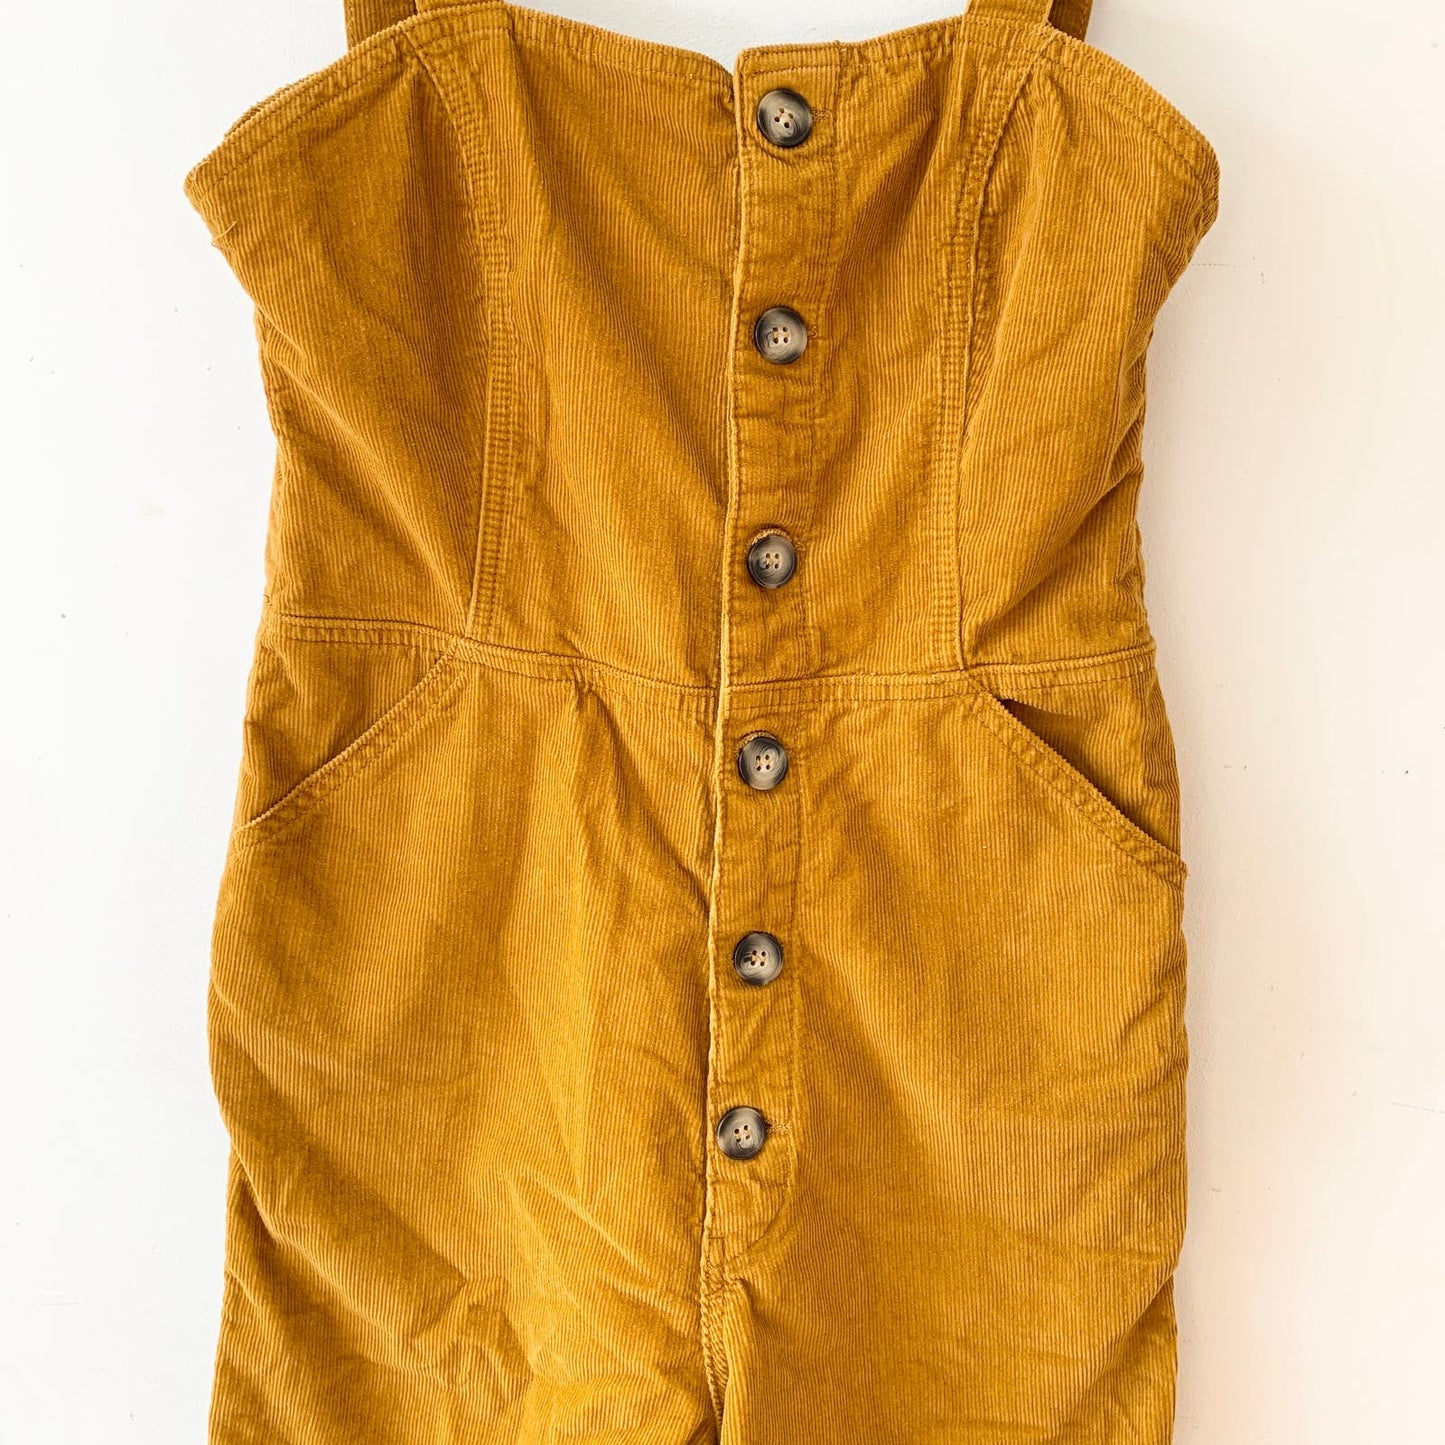 BDG Urban Outfitters Yellow Mustard Dungaree Cropped Corduroy Button Front Jumpsuit Overalls Medium